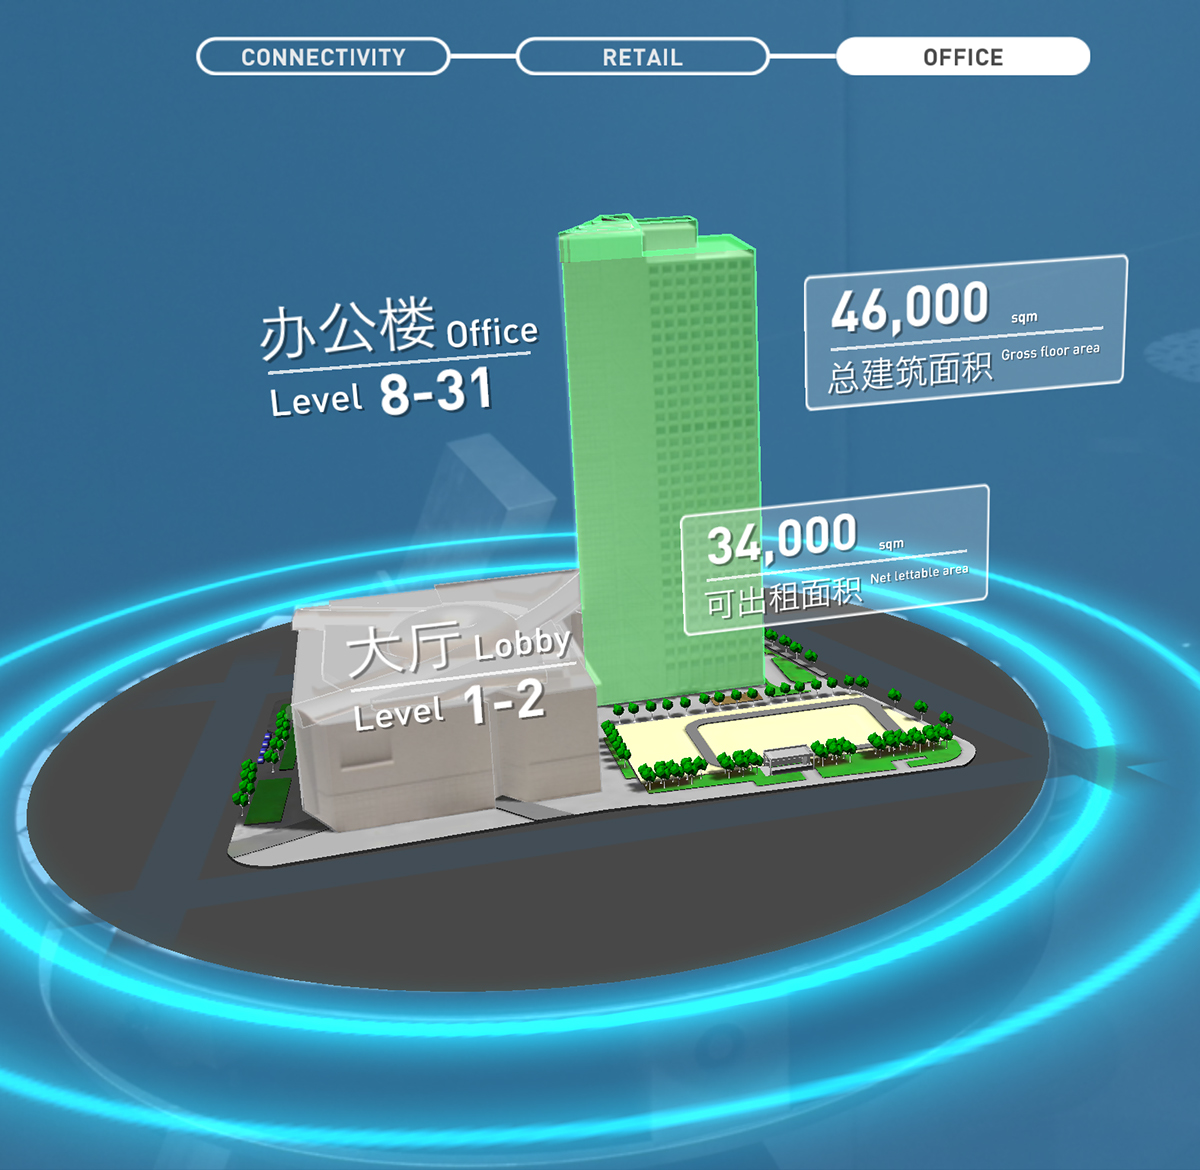 augmented reality shopping mall shanghai Showsuite presentation interactive AR architectural model